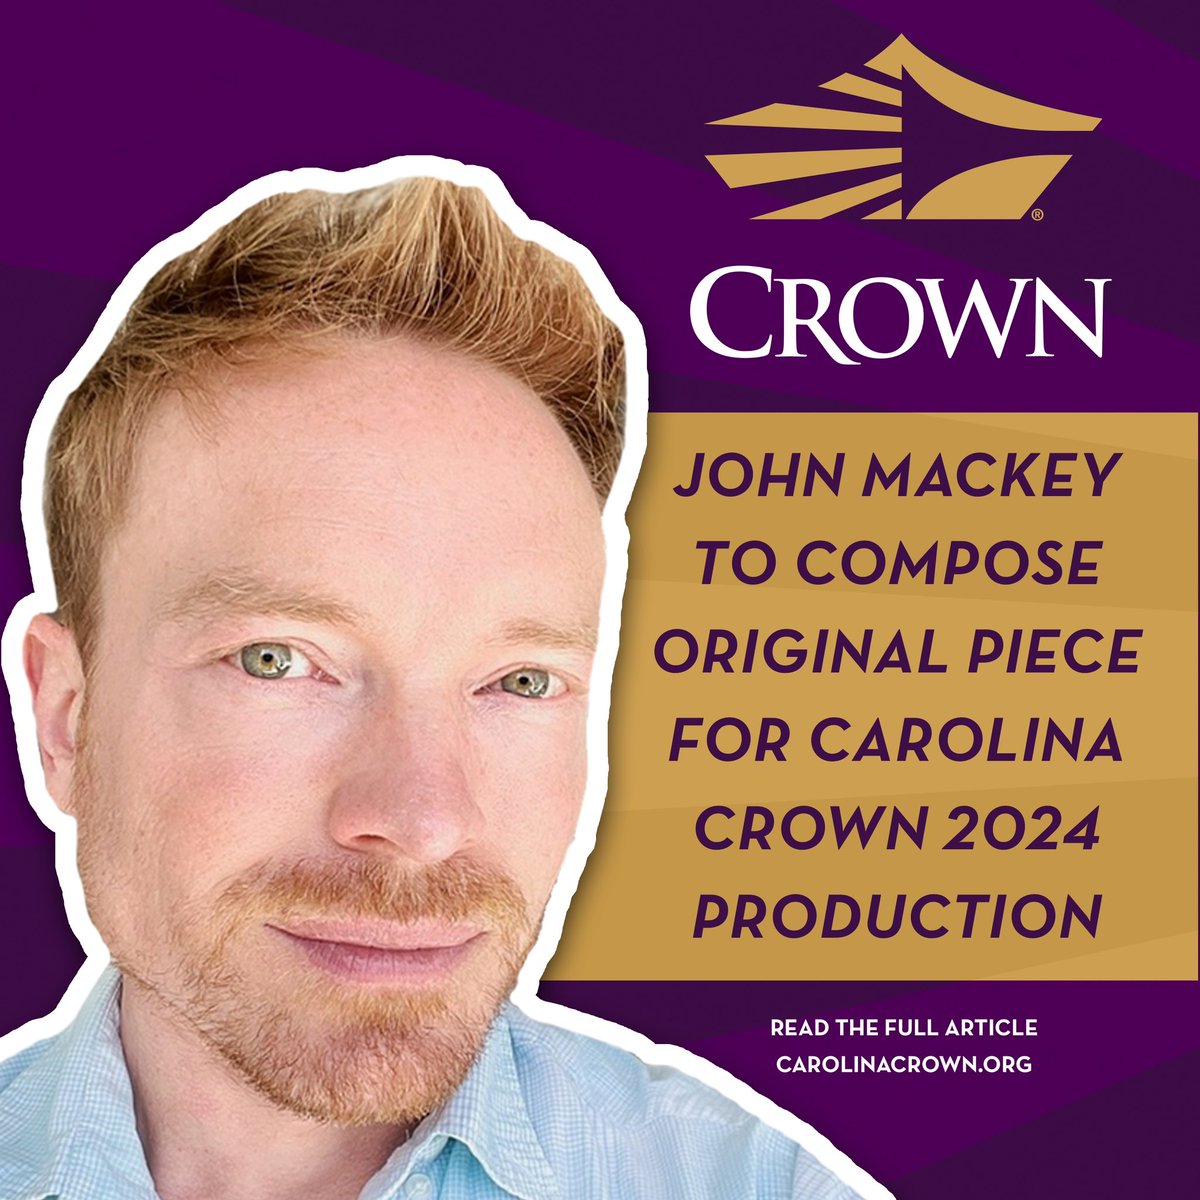 As excitement tor the summer continues to build, we are thrilled to welcome world-renowned composer John Mackey! Mackey has been commissioned to compose an original piece for Crown's upcoming production. Read the full article here: tinyurl.com/CrownMackey #dci2024 #johnmackey